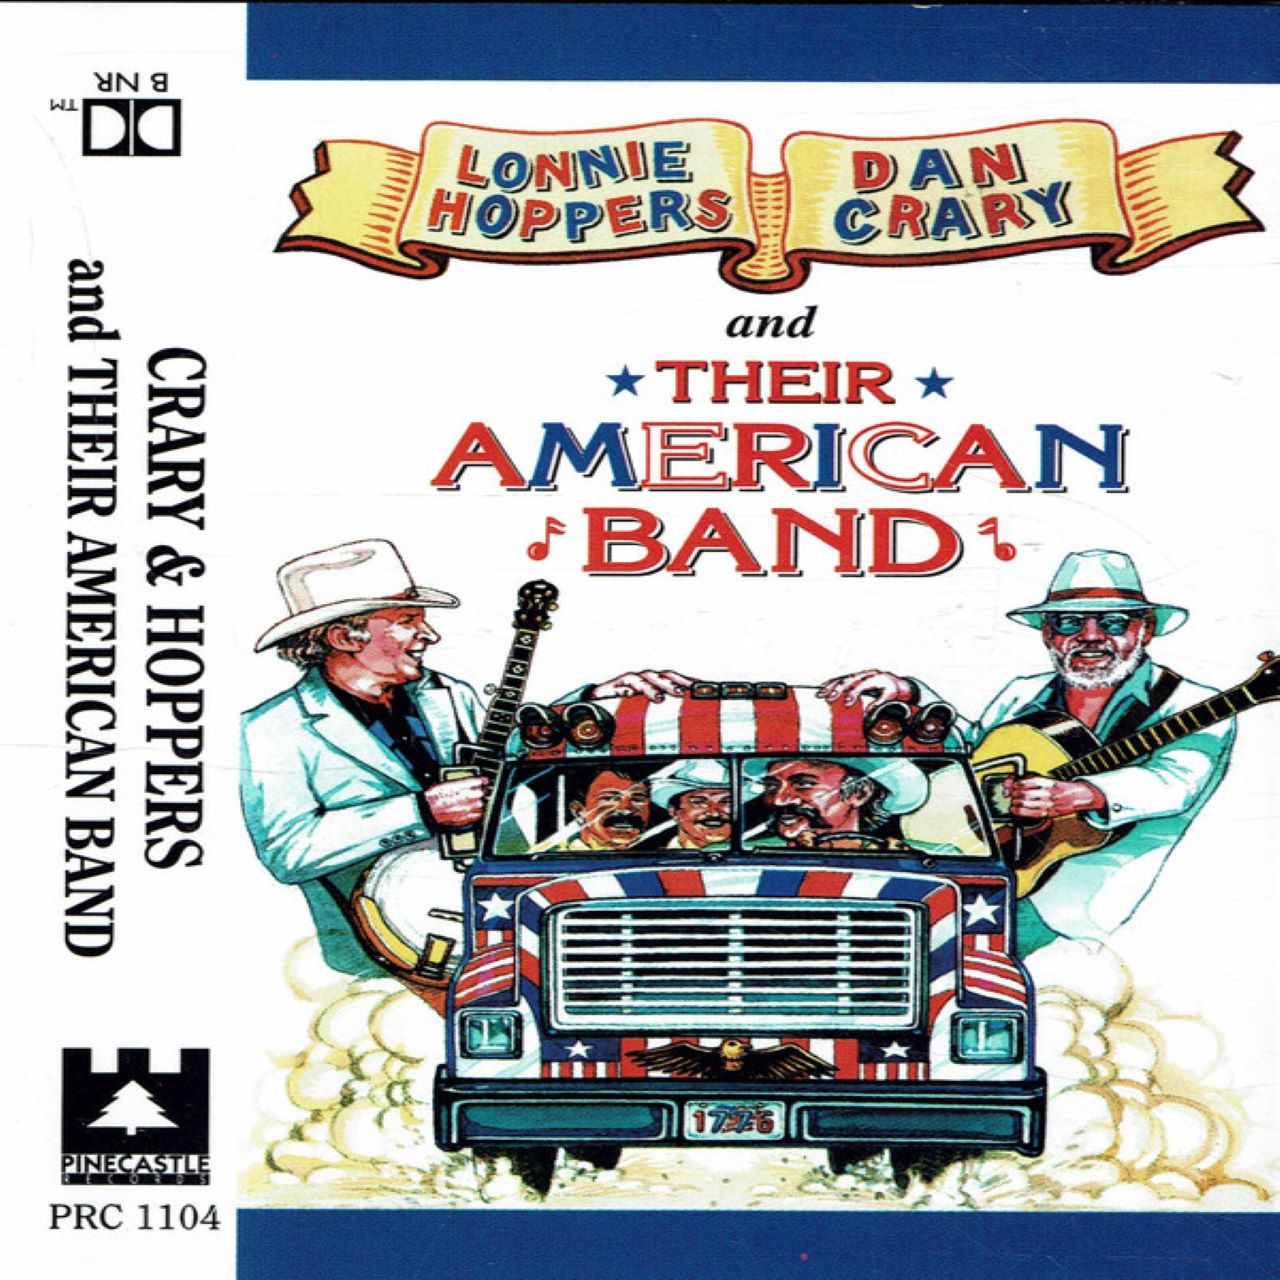 Lonnie Hoppers, Dan Crary - Lonnie Hoppers, Dan Crary And Their American Band cover album